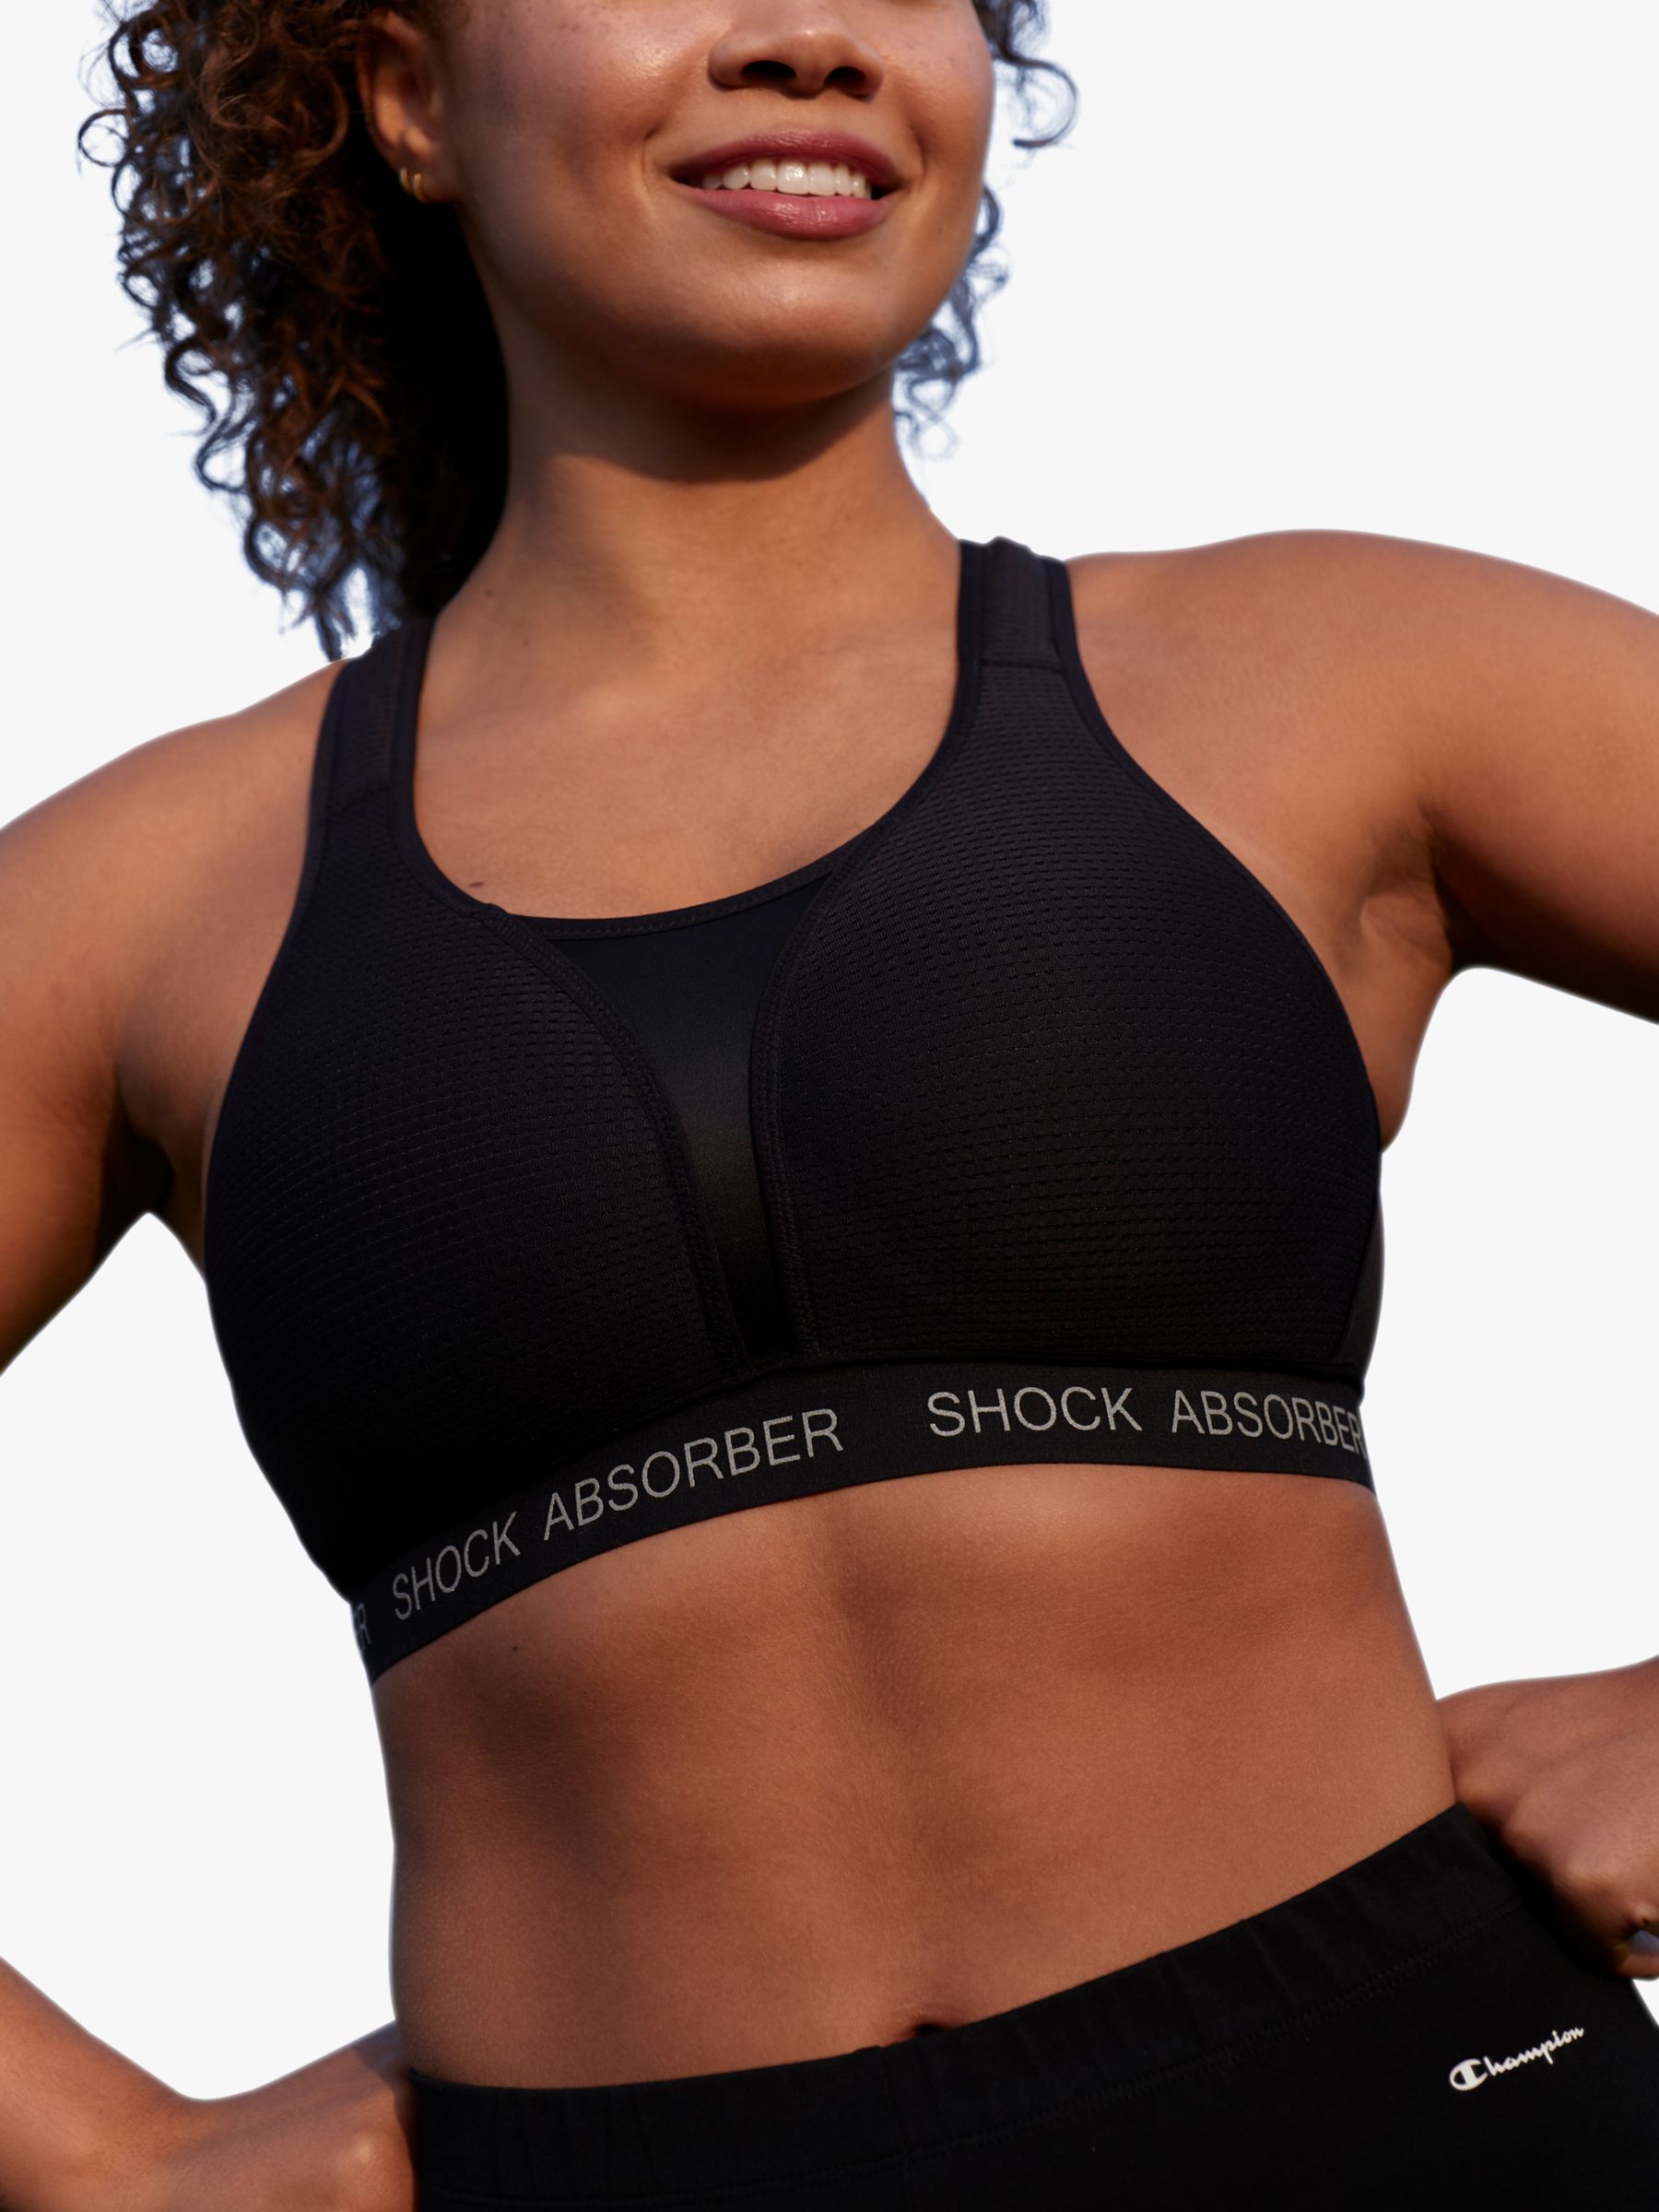 How to Find the Best Padded Sports Bra for Small Chest – The Streets